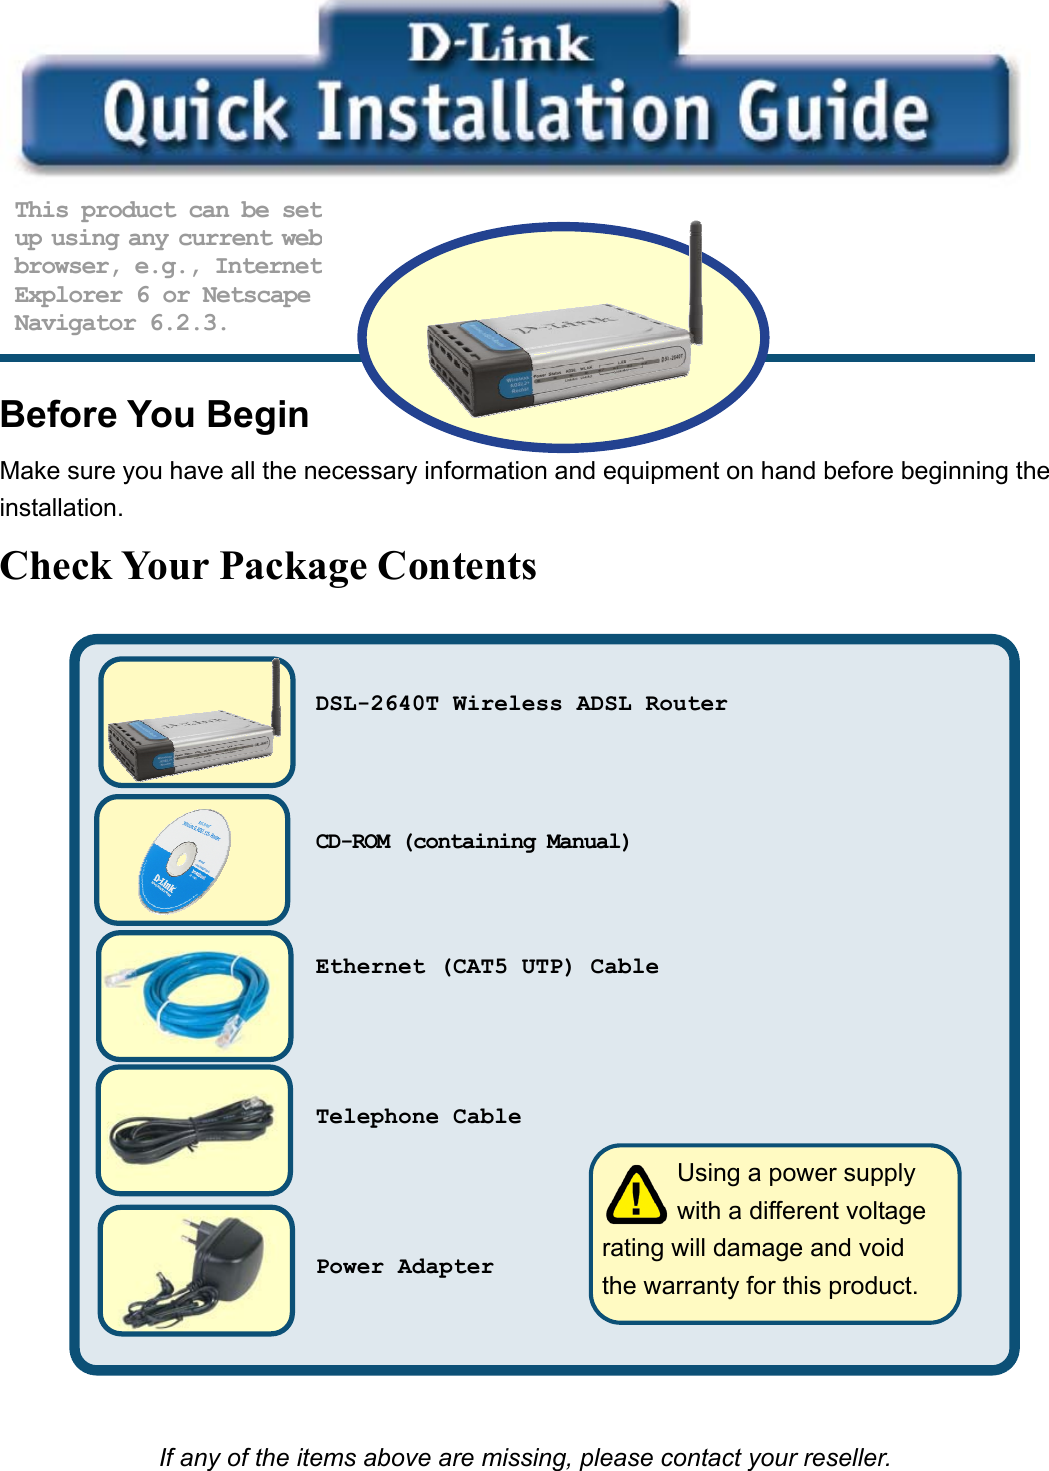           Before You Begin Make sure you have all the necessary information and equipment on hand before beginning the installation. Check Your Package Contents                          If any of the items above are missing, please contact your reseller. This product can be setup using any current webbrowser, e.g., InternetExplorer 6 or Netscape Navigator 6.2.3.          Using a power supply   with a different voltage rating will damage and void the warranty for this product. DSL-2640T Wireless ADSL Router   CD-ROM (containing Manual)   Ethernet (CAT5 UTP) Cable    Telephone Cable    Power Adapter   